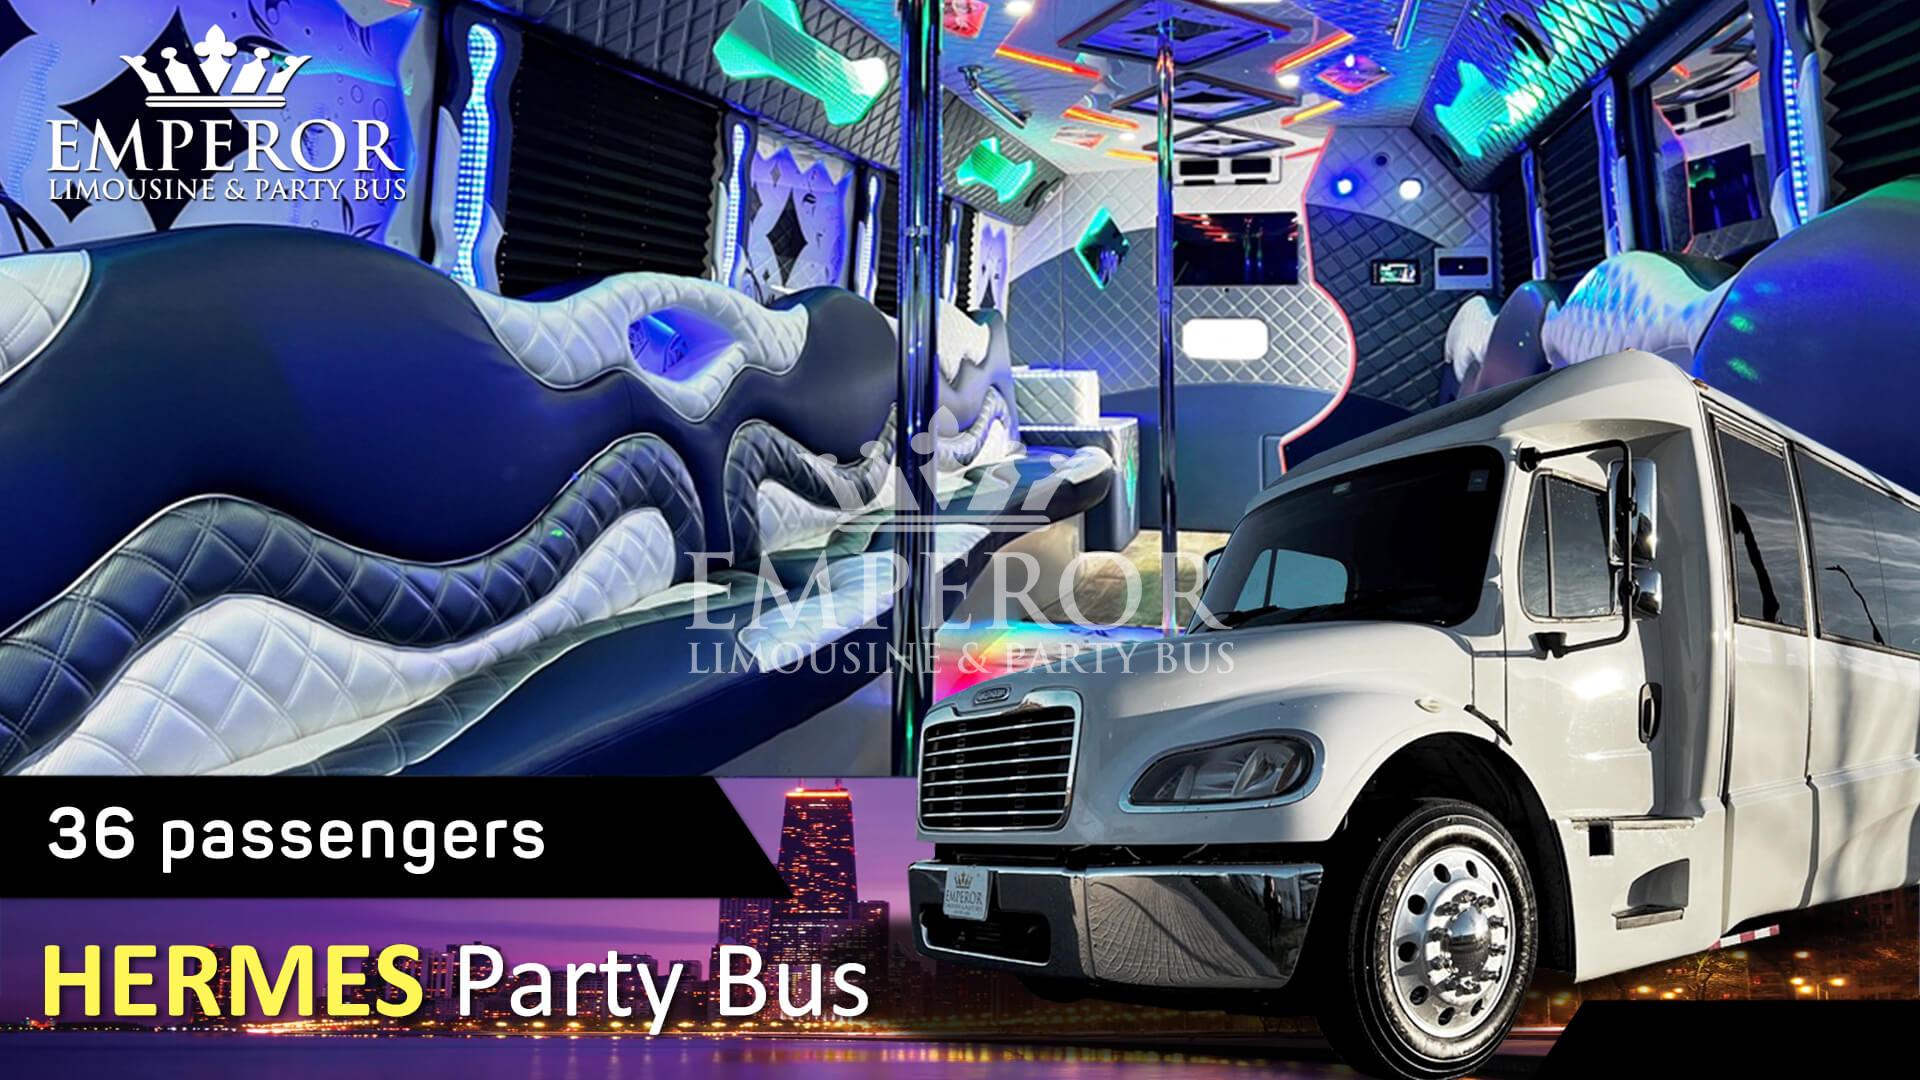 Party bus rental in Bolingbrook, IL - Hermes Edition